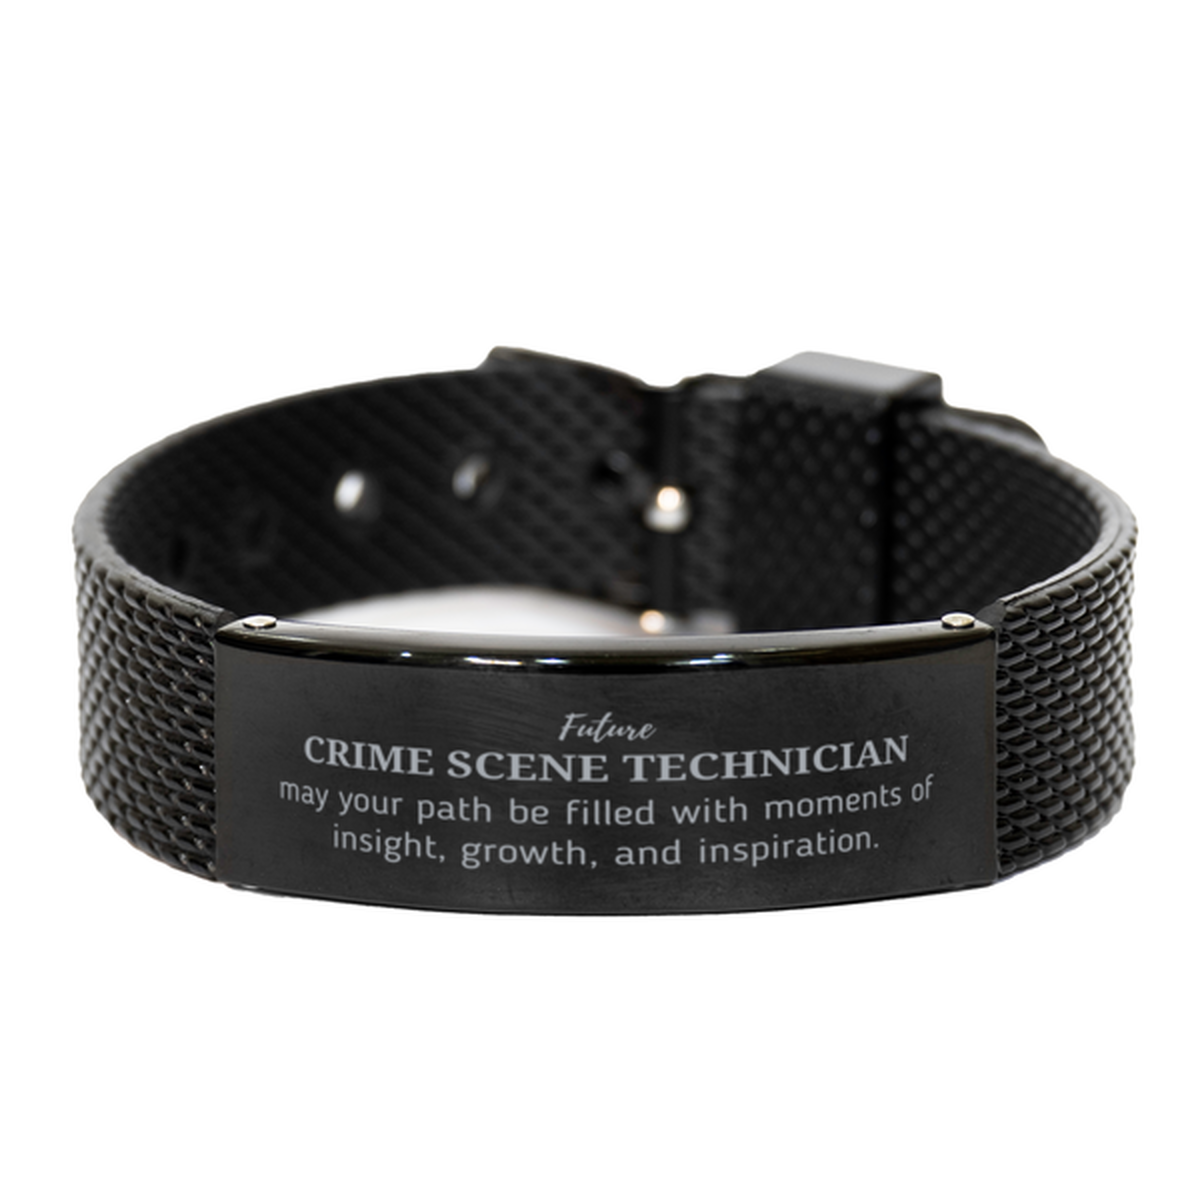 Future Crime Scene Technician Gifts, May your path be filled with moments of insight, Graduation Gifts for New Crime Scene Technician, Christmas Unique Black Shark Mesh Bracelet For Men, Women, Friends